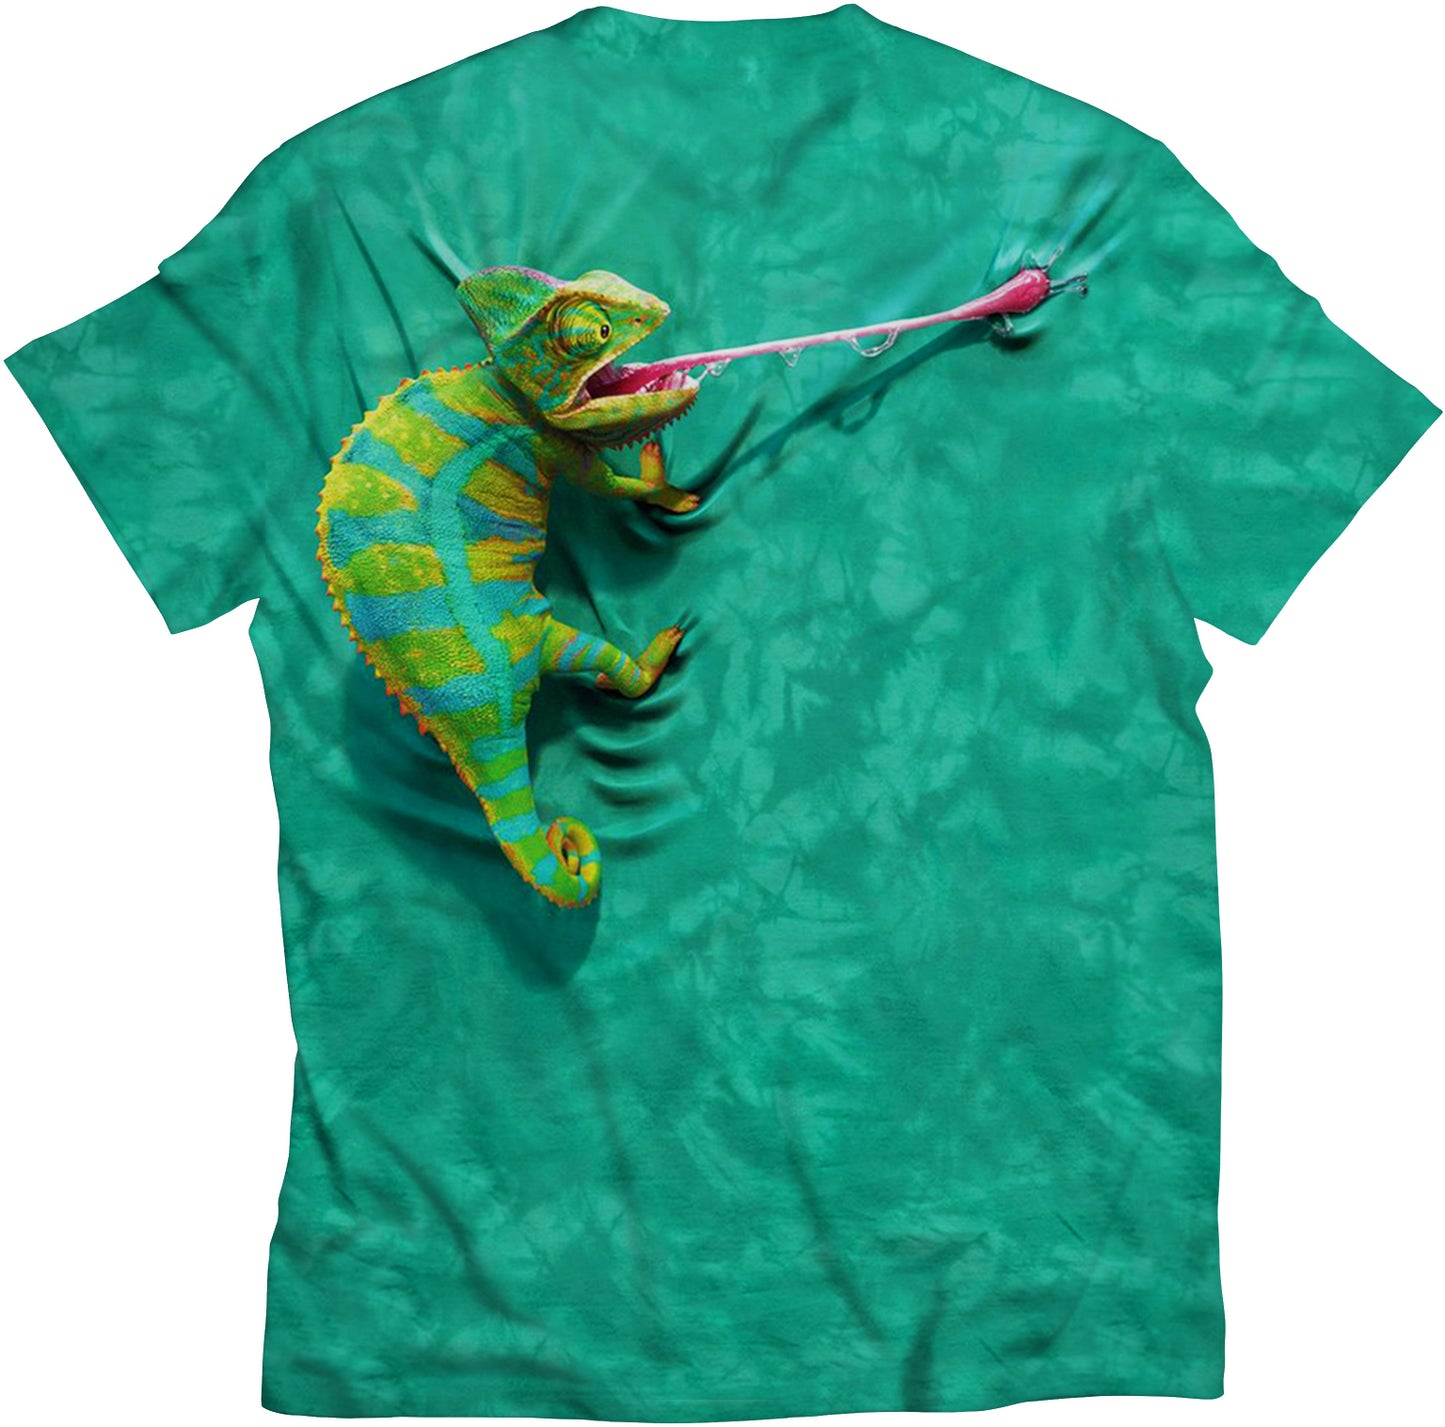 themountain.com stand out all over print chameleon t shirt reptile pets cold blooded hyperrealistic art inspired from the mountain t shirt usa standout Pitbull t shirt dog t shirt black t shirt dry fit t shirt pet t shirt pet supply gifts animal print tshirt all over printed t shirt dog face t shirt peta bluecross